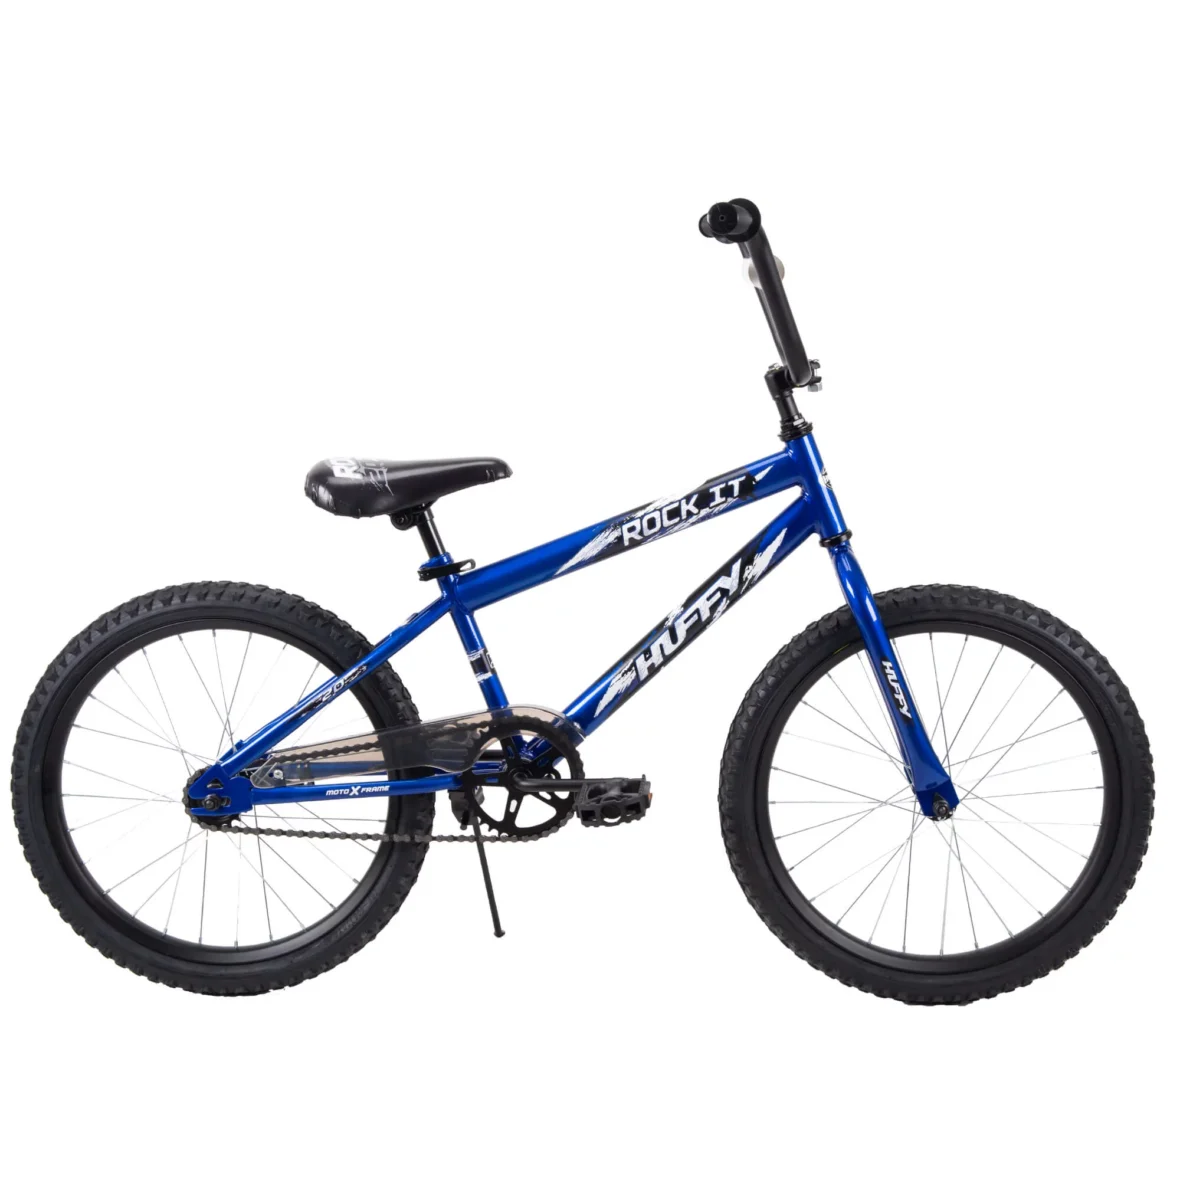 Huffy-20-in-Rock-It-Kids-Bike-for-Boys-Ages-5-and-up-Child-Royal-Blue_df34db19-acc1-4795-9db9-0a898e674310_1.eb18f6ecc38cb39e54a755c43dcfcc75